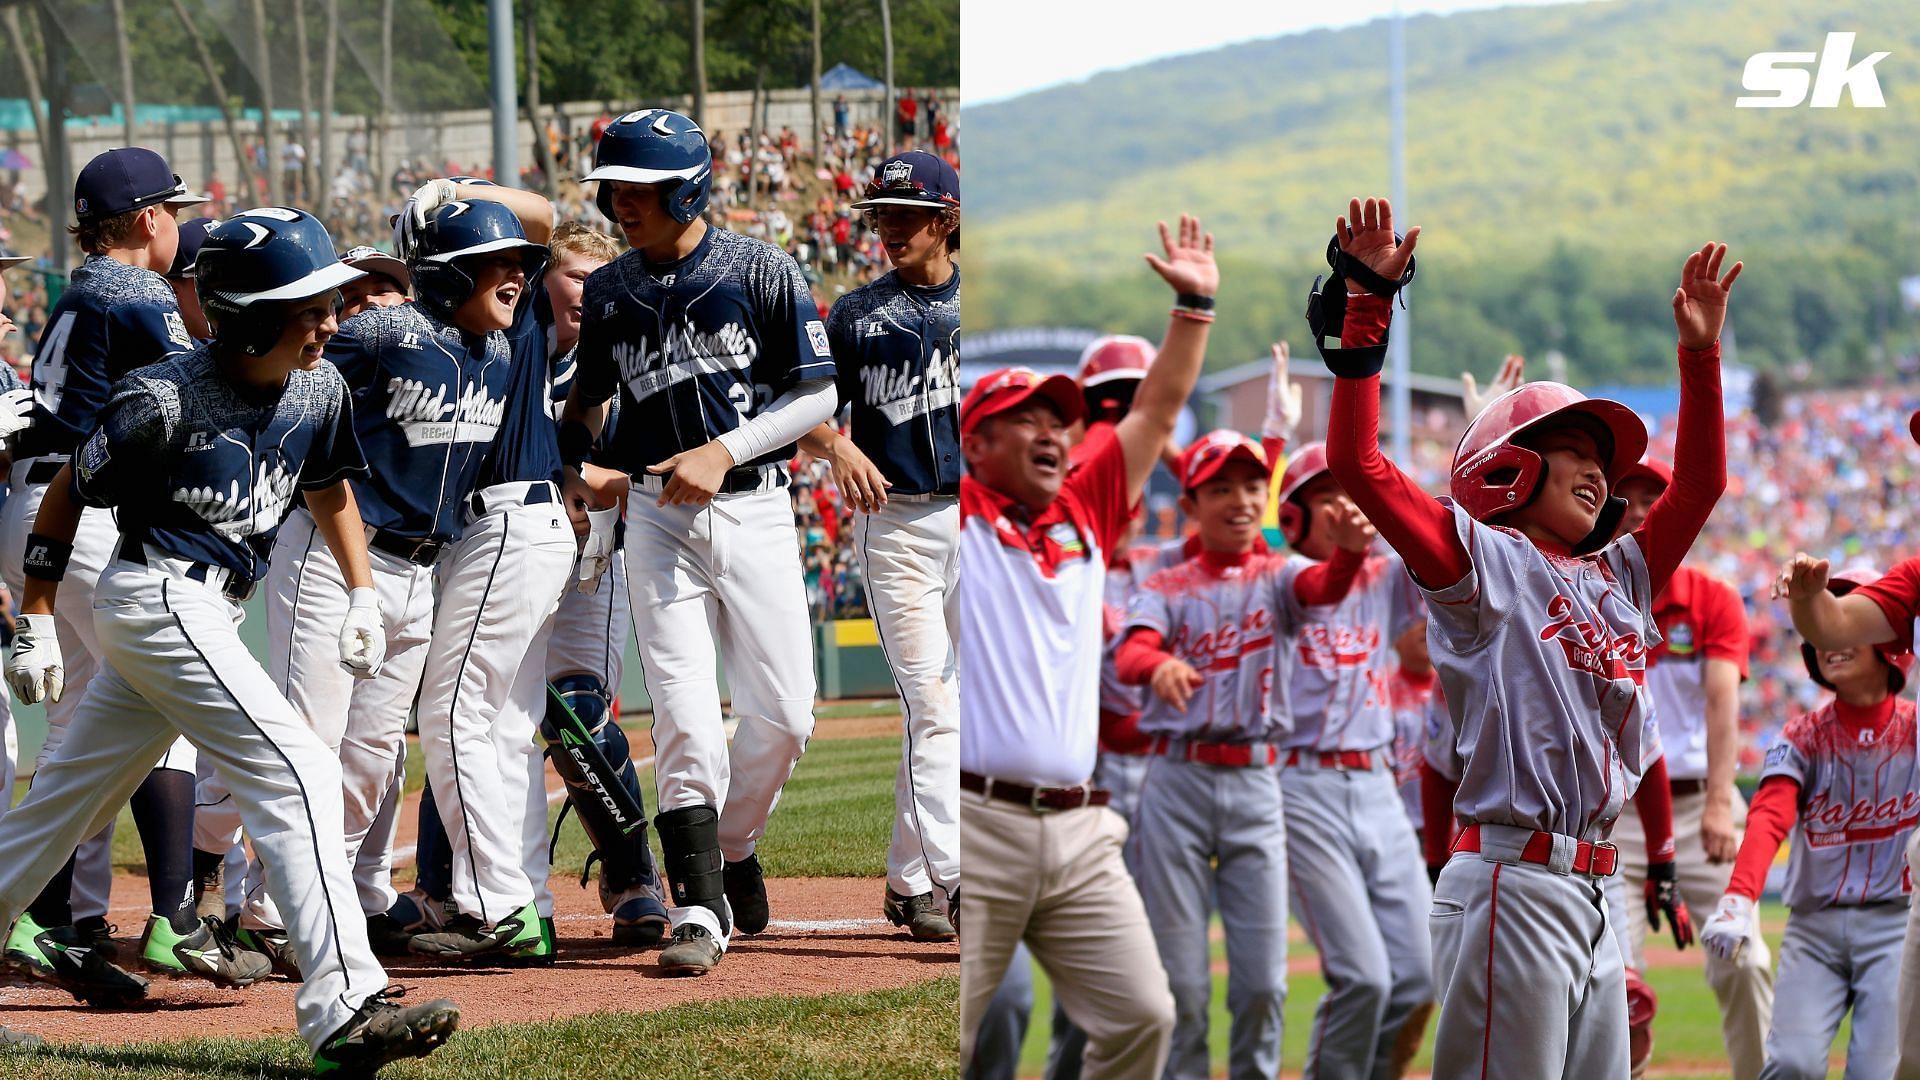 Little League World Series: New uniforms bring new numbers for Mid